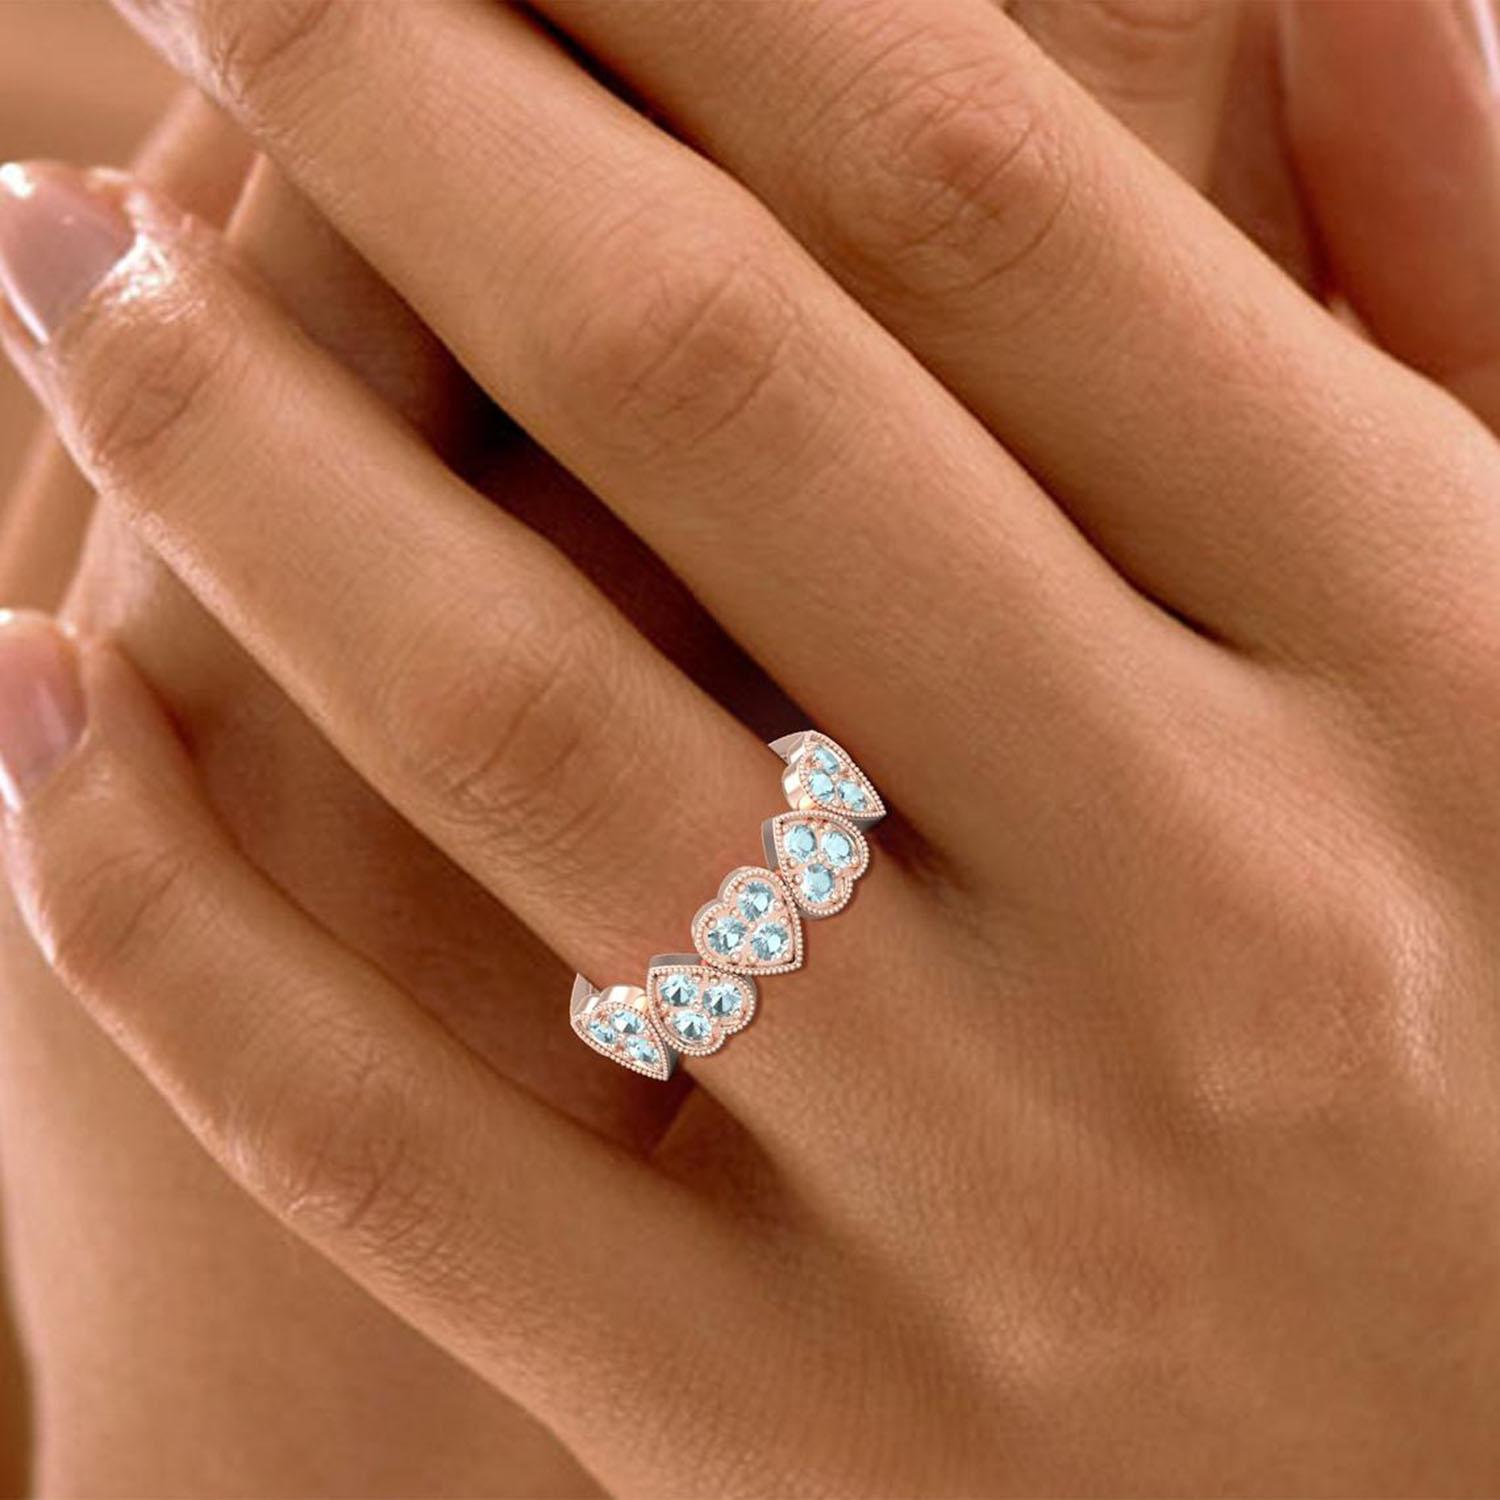 Modern 14 Karat Gold Aquamarine Ring / March Birthstone Ring / Heart Ring for Her For Sale